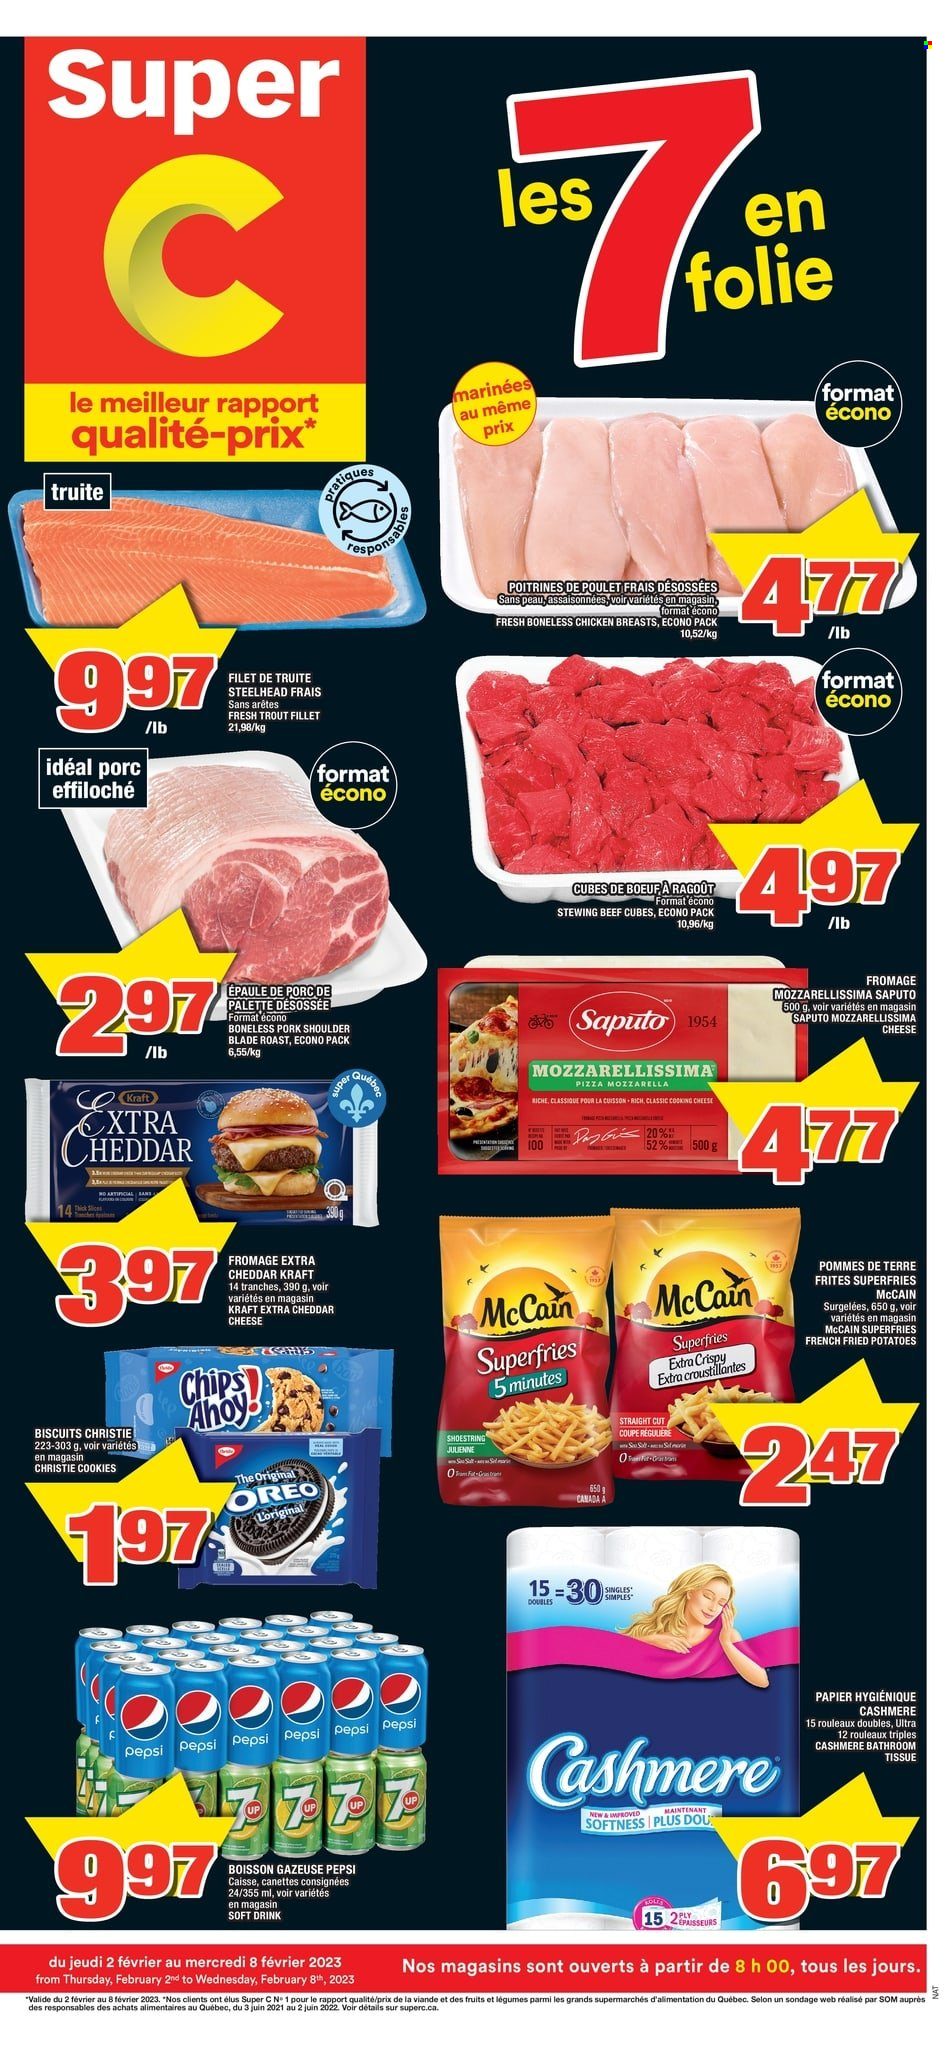 thumbnail - Super C Flyer - February 02, 2023 - February 08, 2023 - Sales products - trout, pizza, Kraft®, McCain, potato fries, cookies, biscuit, Chips Ahoy!, chips, Pepsi, soft drink, chicken breasts, beef meat, stewing beef, pork meat, pork shoulder, bath tissue, Palette, Oreo. Page 1.